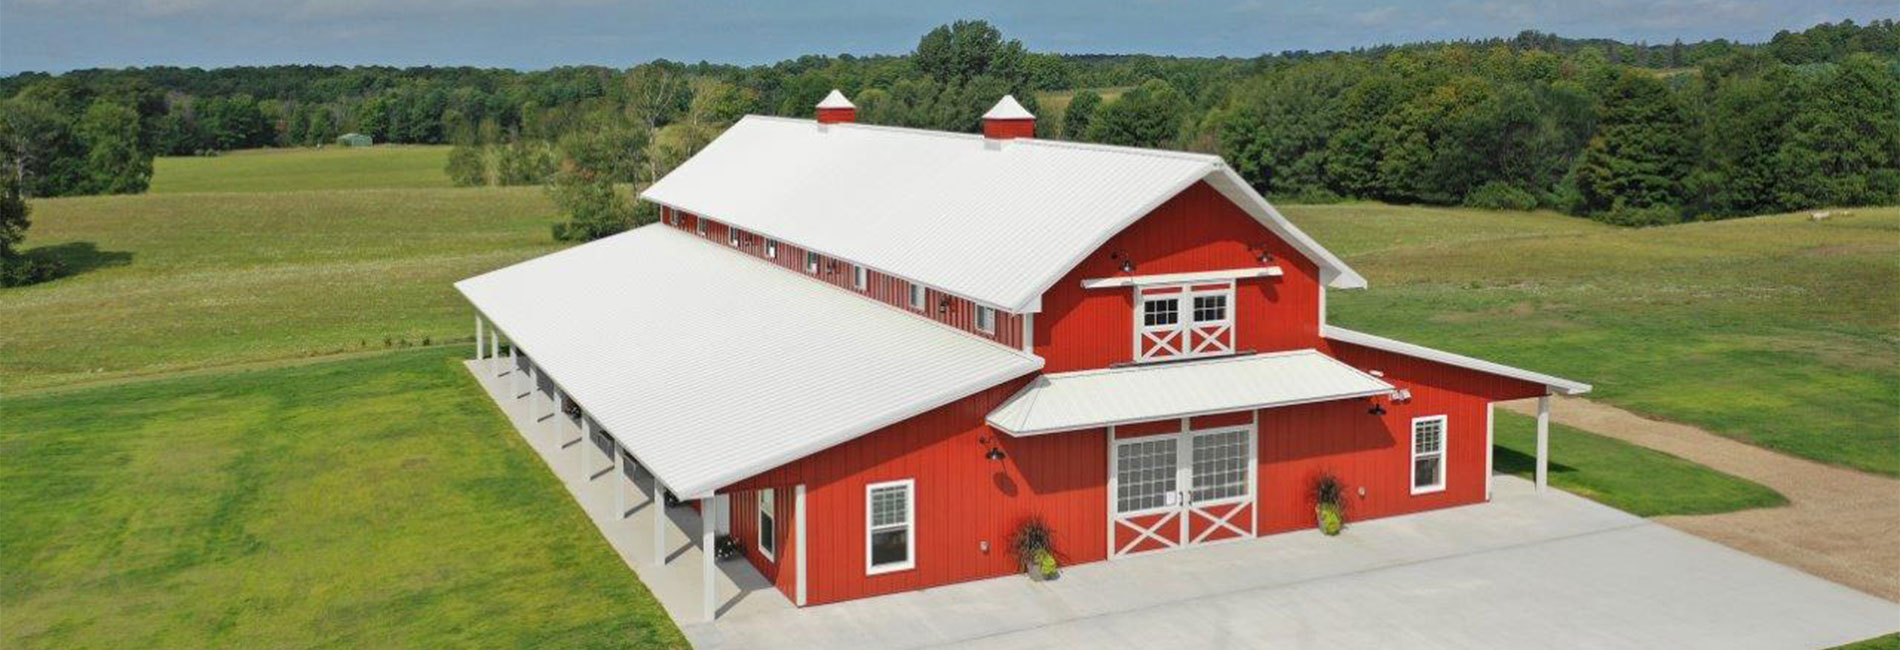 Featured Pole Barn Projects